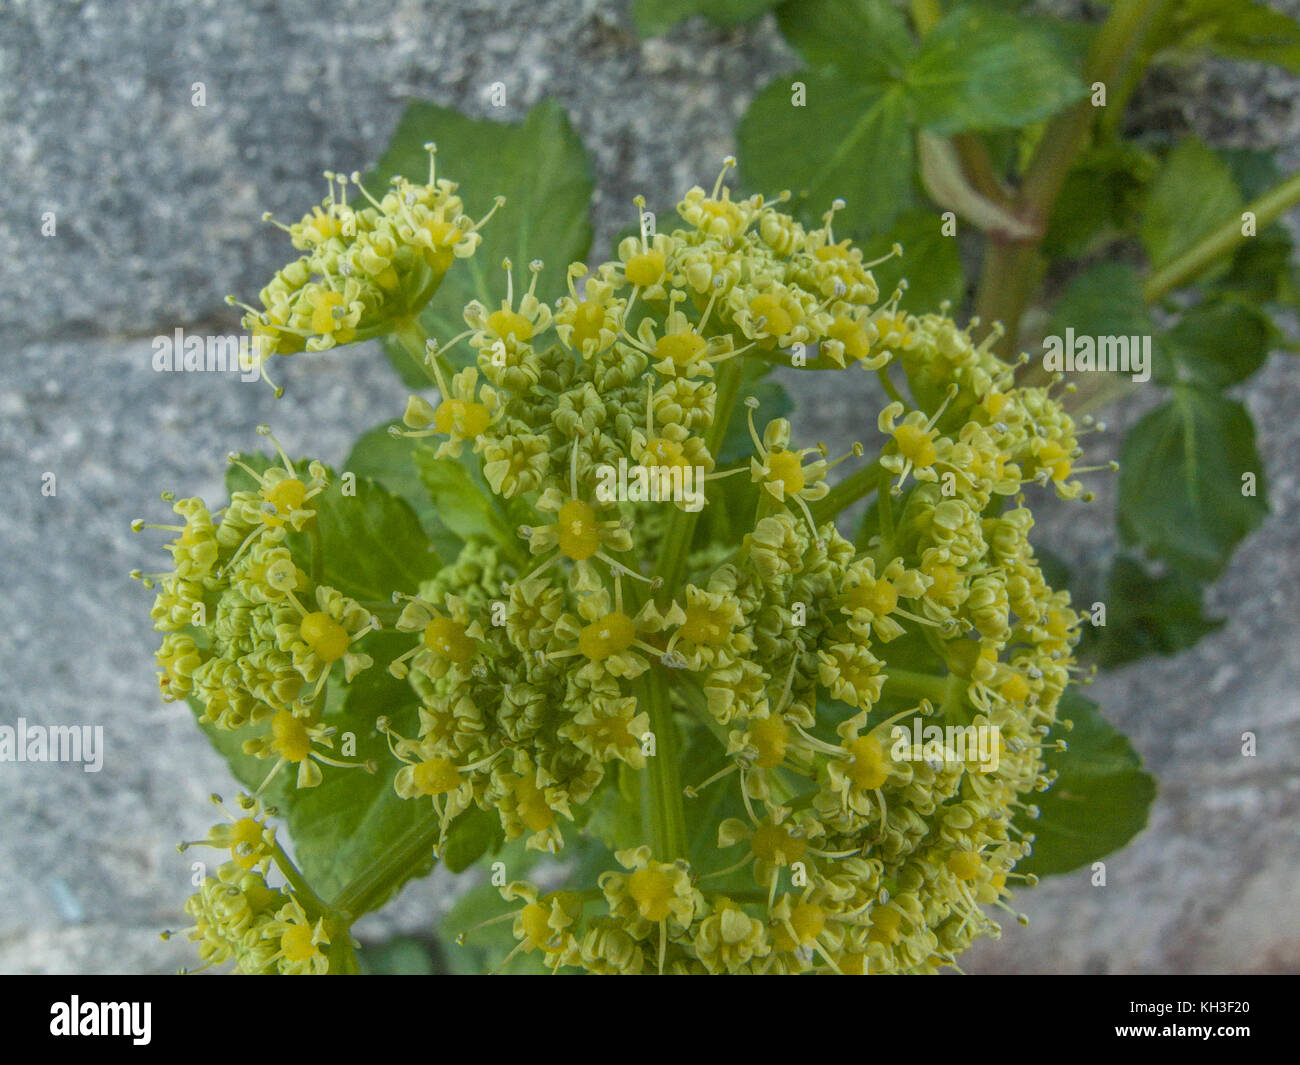 Flowers and flower buds of Alexanders / Smyrnium olusatrum - an ebible wild plant which belongs to the Umbellifer family. Cow parsley family. Stock Photo